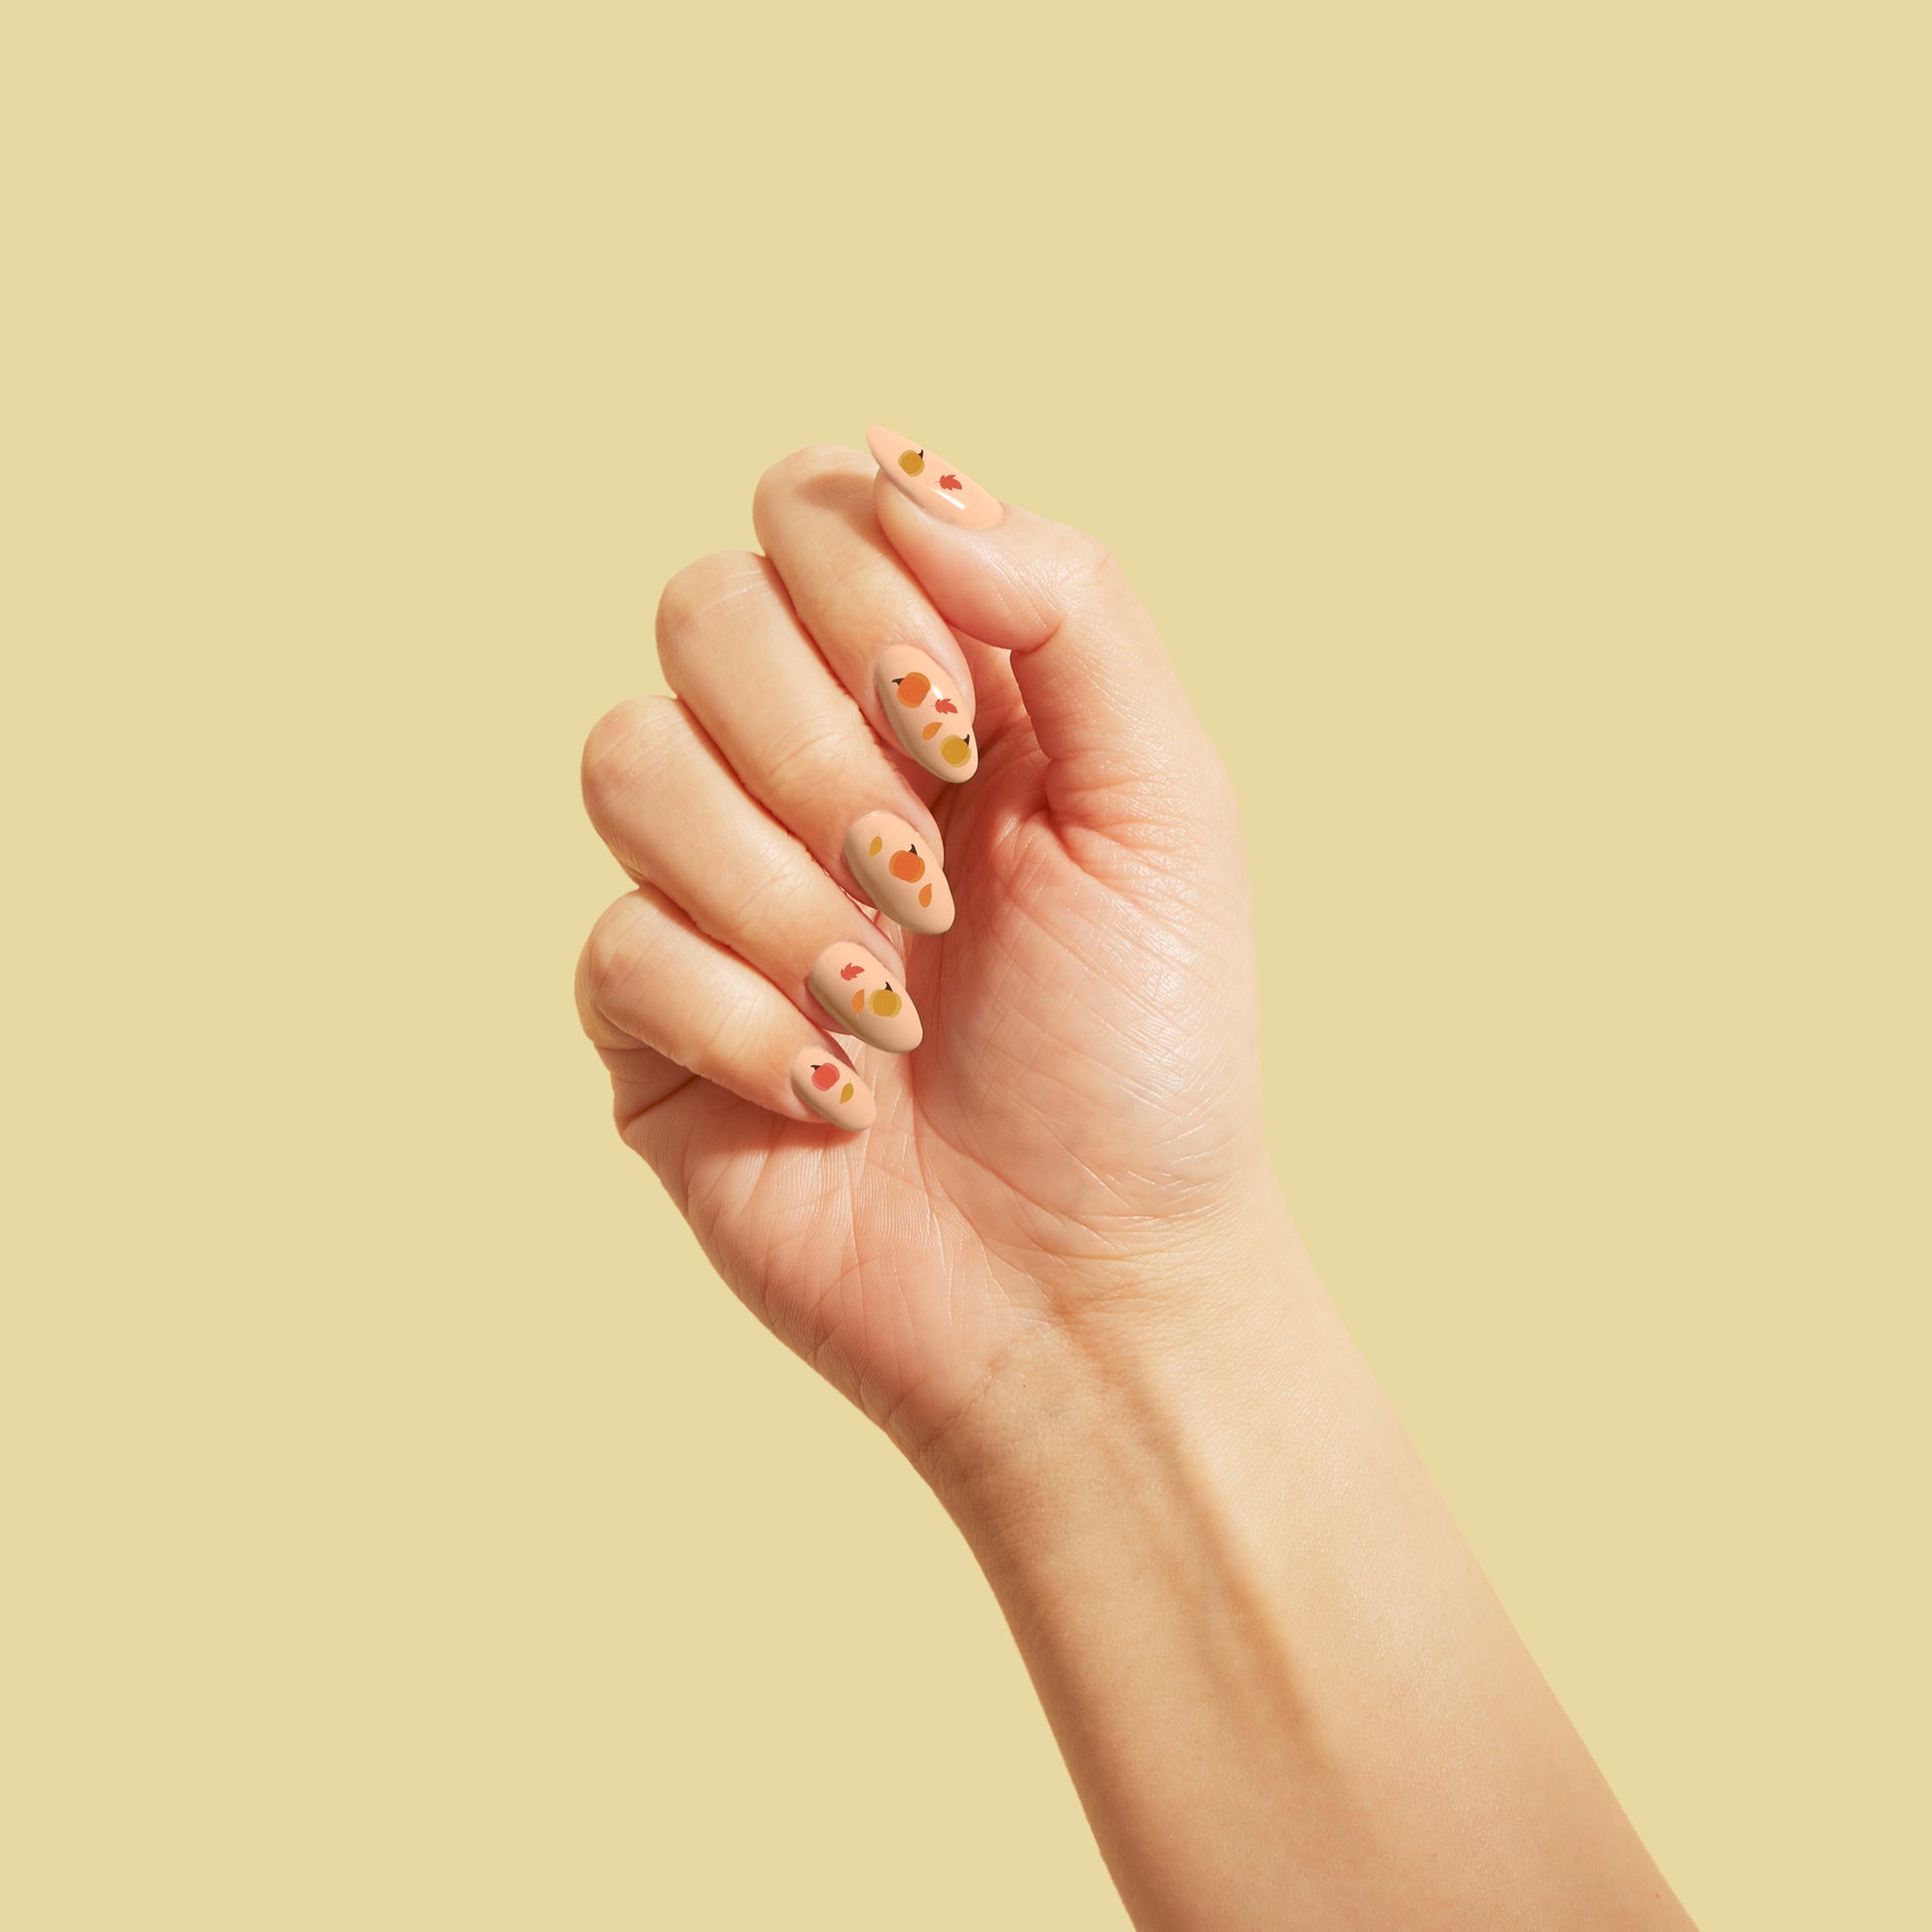 Pumpkin Pie Nail Stickers on a manicured hand, yellow background